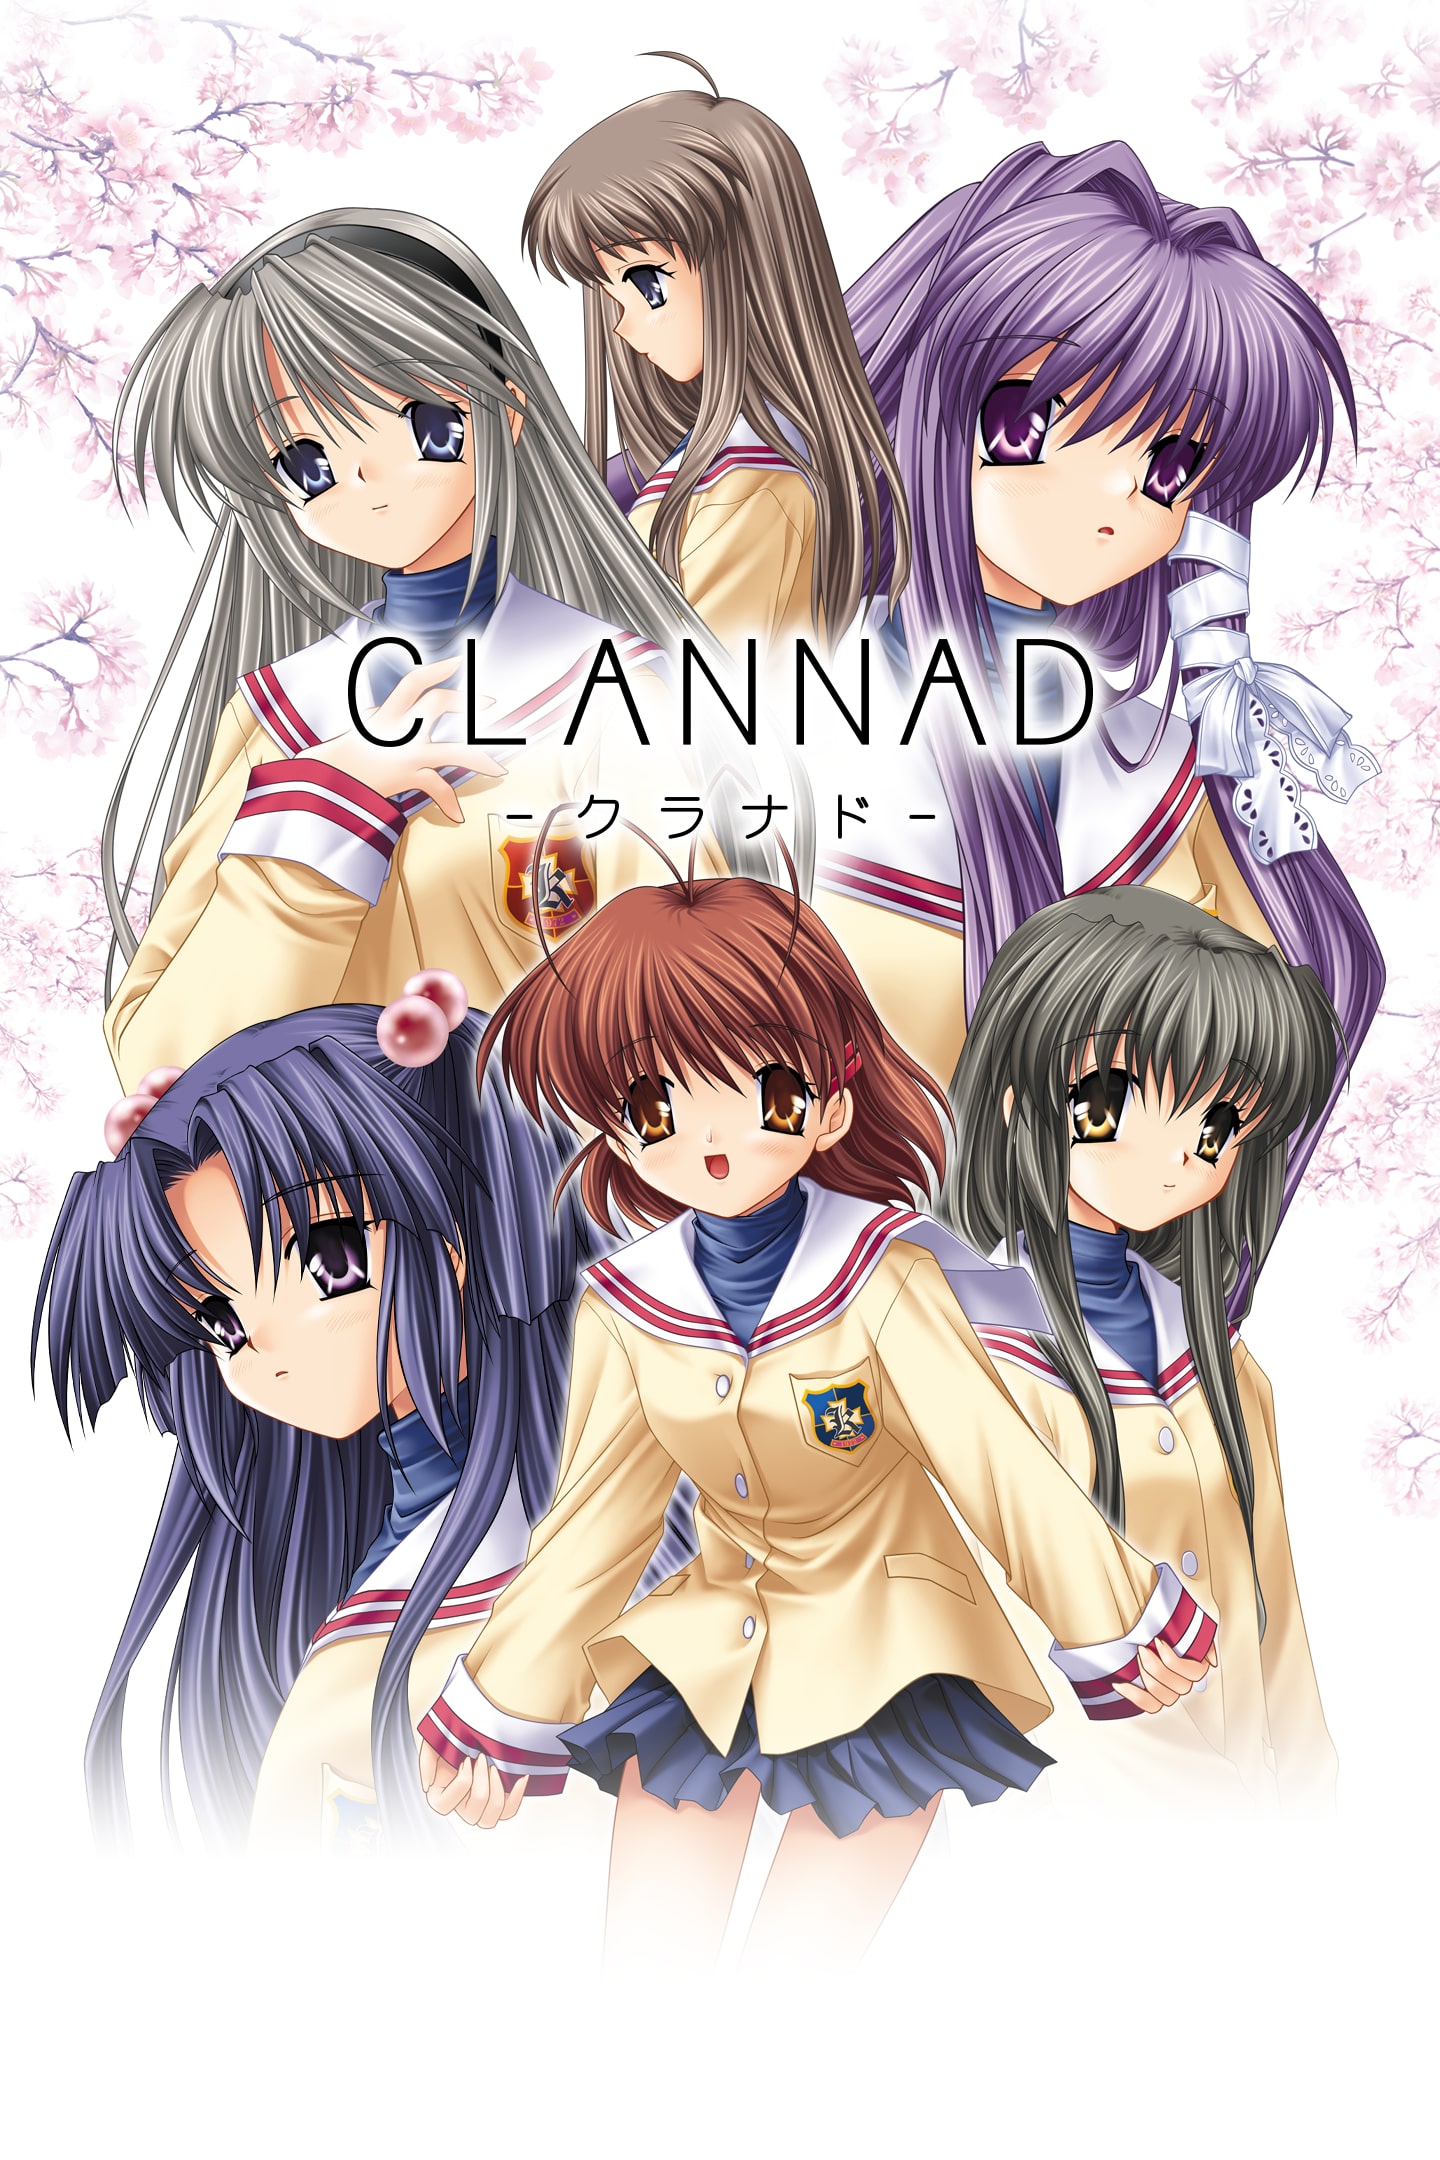 Double Sided Clannad Anime Poster, anime clannad de que va - thirstymag.com